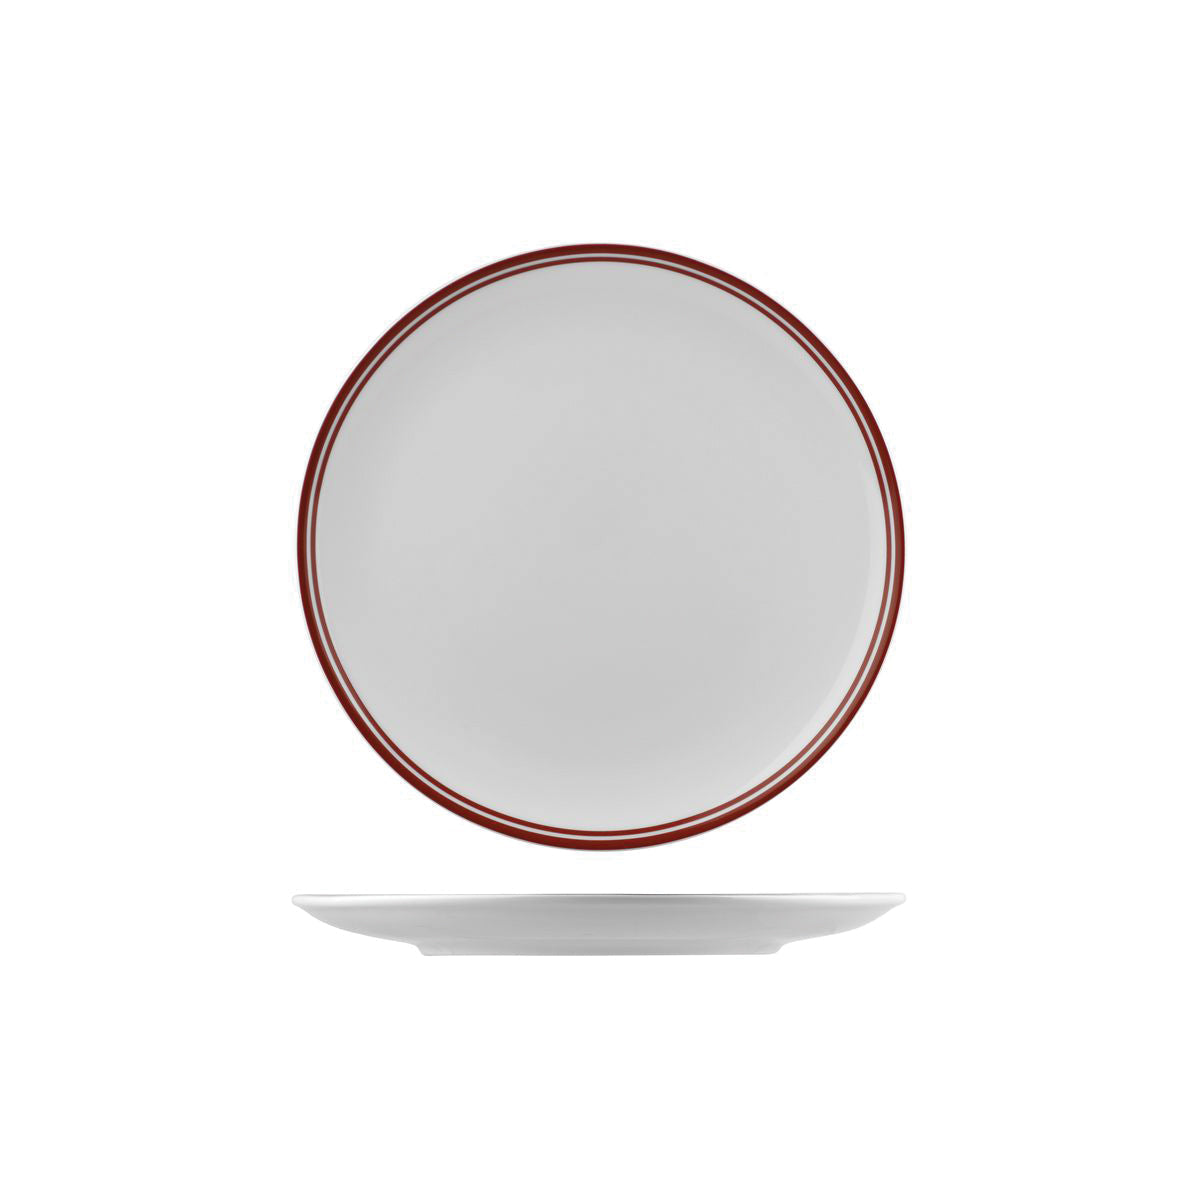 Round Coupe Plate Red, 240Mm, Nano Cru from Rak Porcelain. made out of Porcelain and sold in boxes of 12. Hospitality quality at wholesale price with The Flying Fork! 